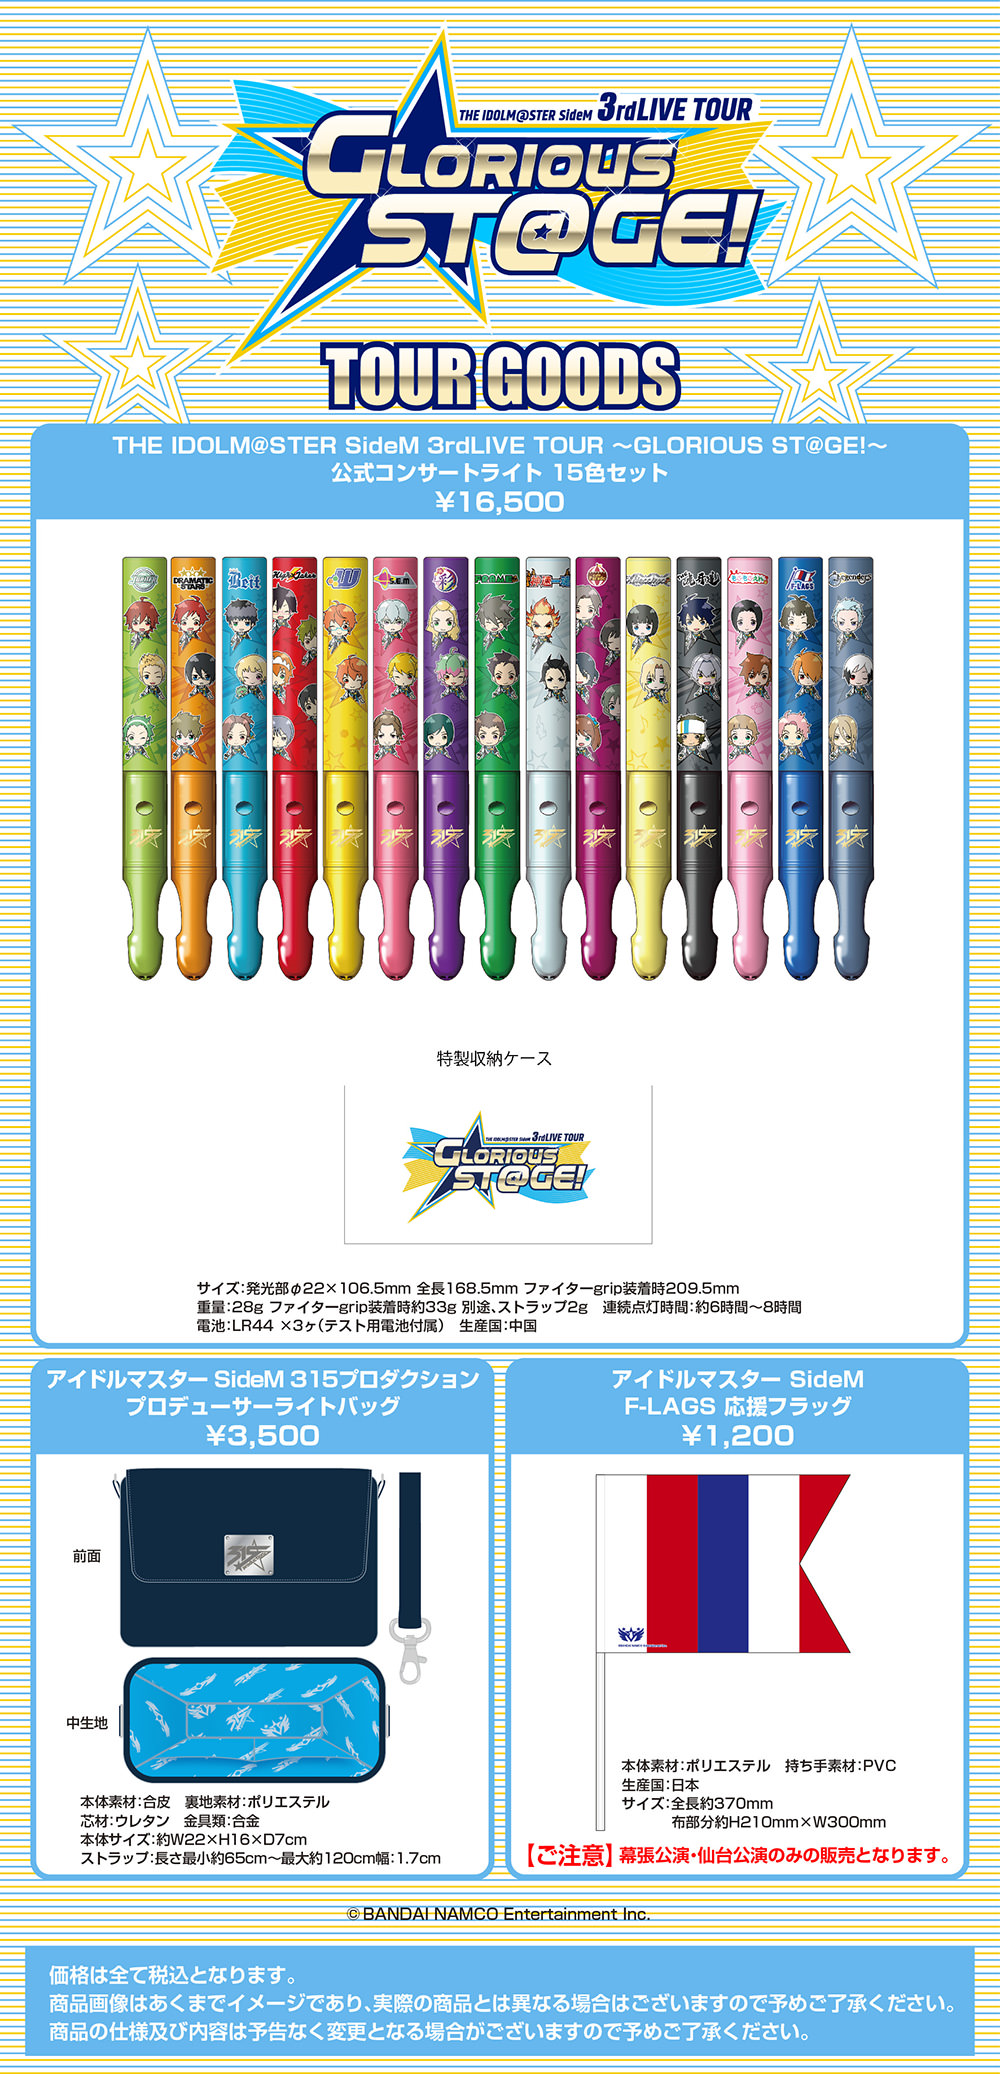 Goods The Idolm Ster Sidem 3rd Stage Lantis Web Site